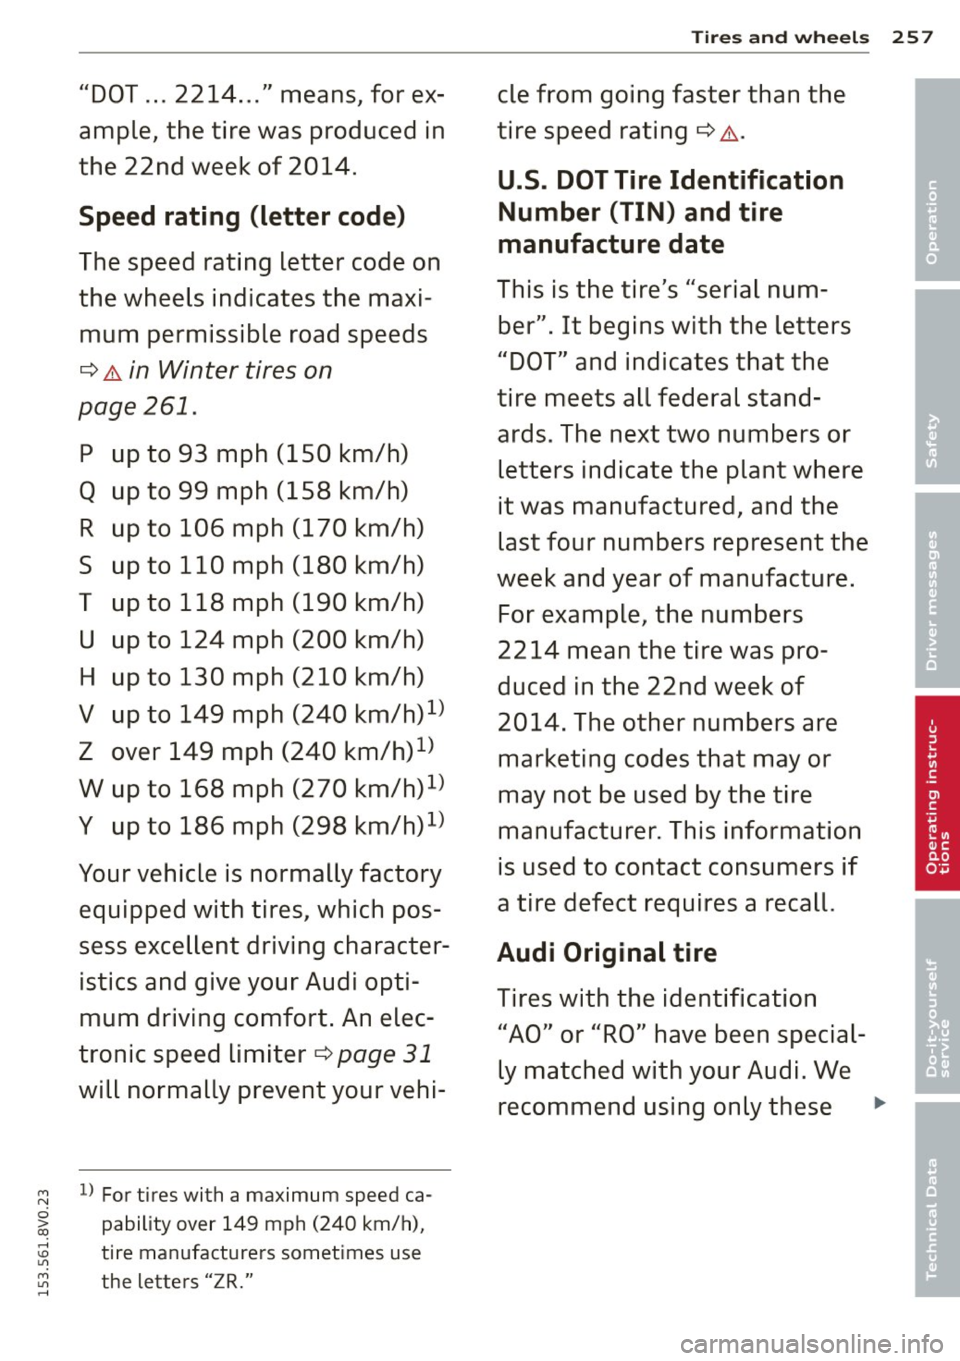 AUDI S3 2015  Owners Manual M N 
0 > co ...... \!) 1.11 
M 1.11 ...... 
"DOT ...  2214  ... "  means,  for  ex­
ample,  the  tire  was  produced  in 
the  22nd  week  of  2014. 
Speed  rating  (letter  code) 
The speed  ratin